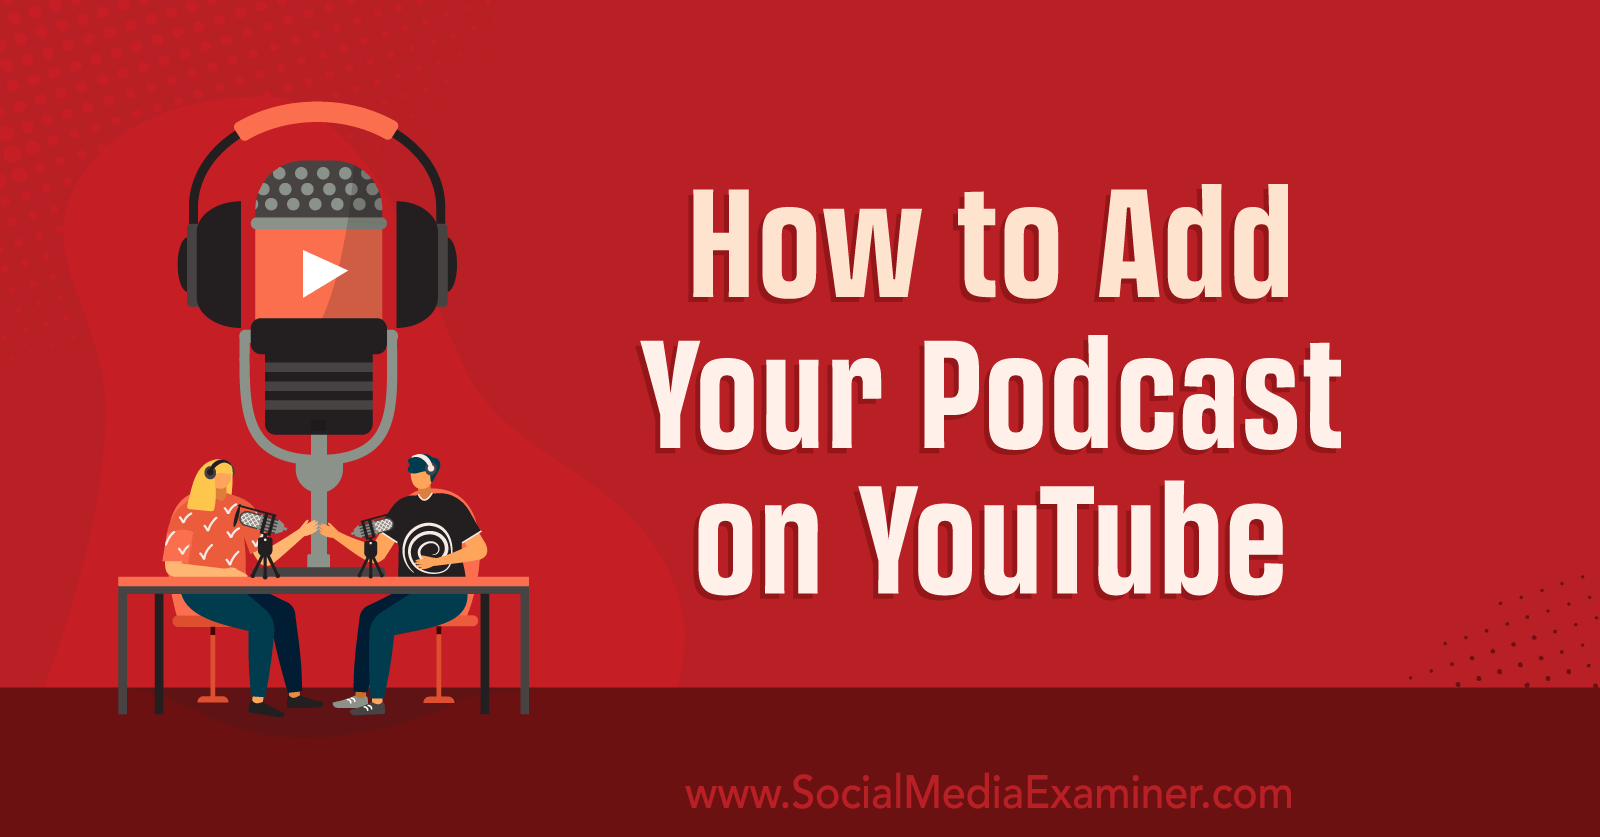 How to Add Your Podcast on YouTube by Social Media Examiner